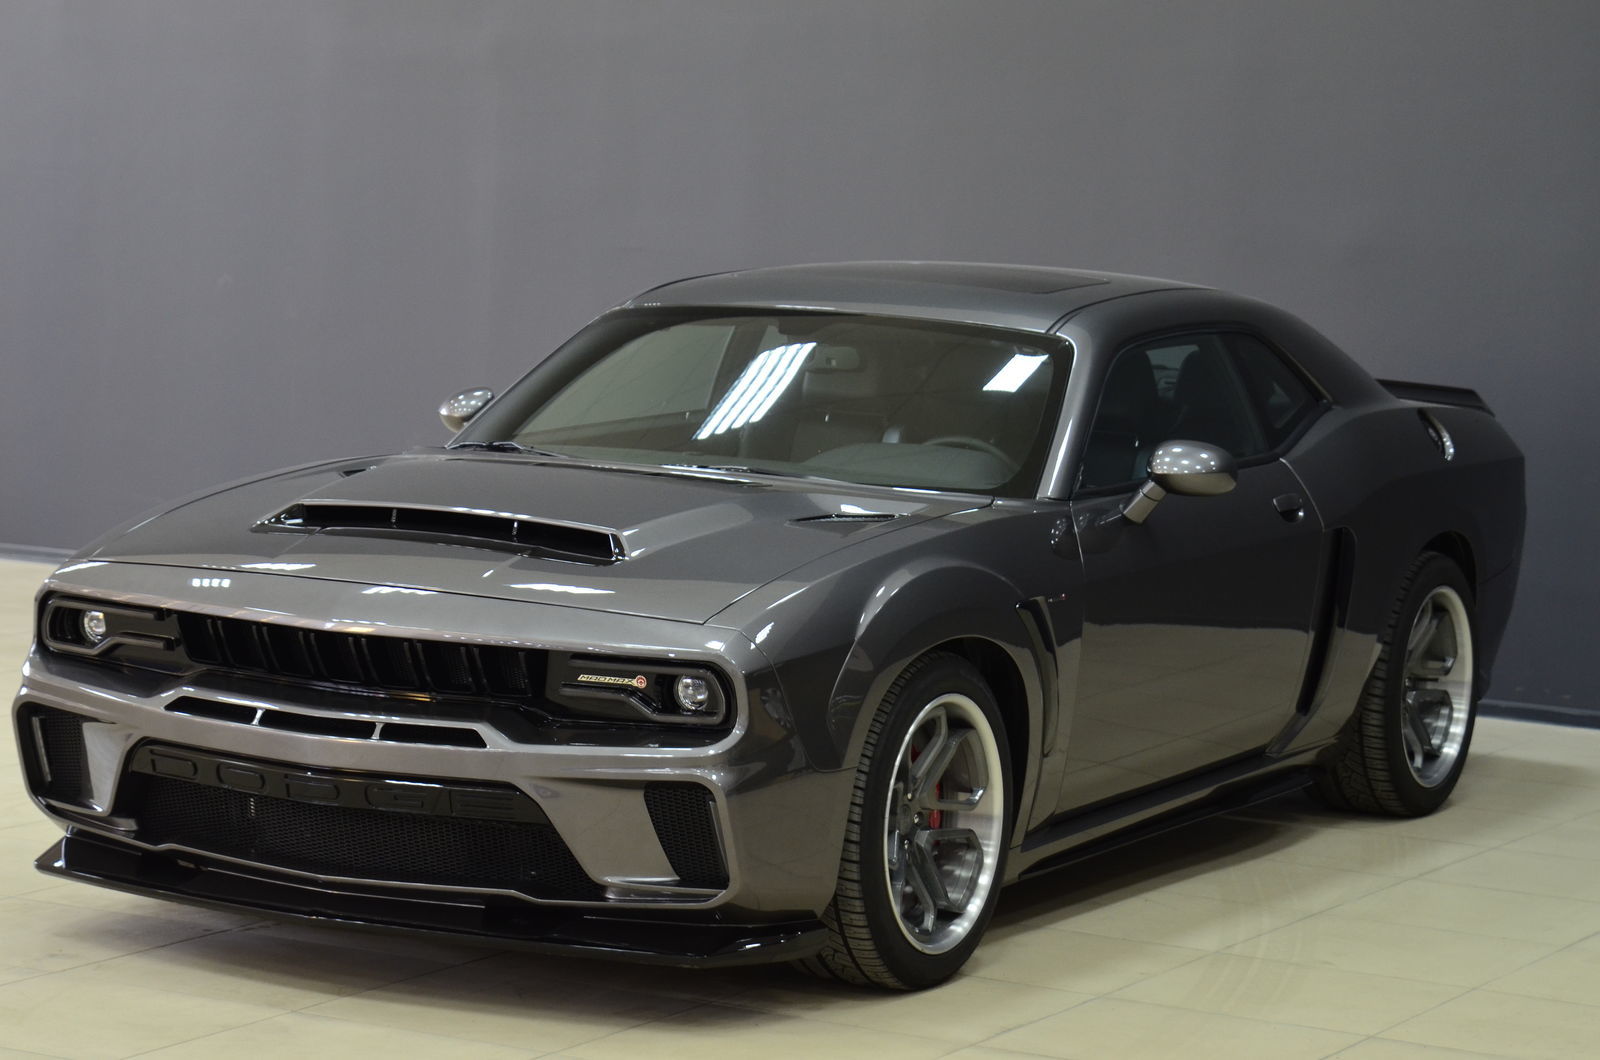 SCL PERFORMANCE GLOBAL body kit MAD MAX for Dodge Challenger